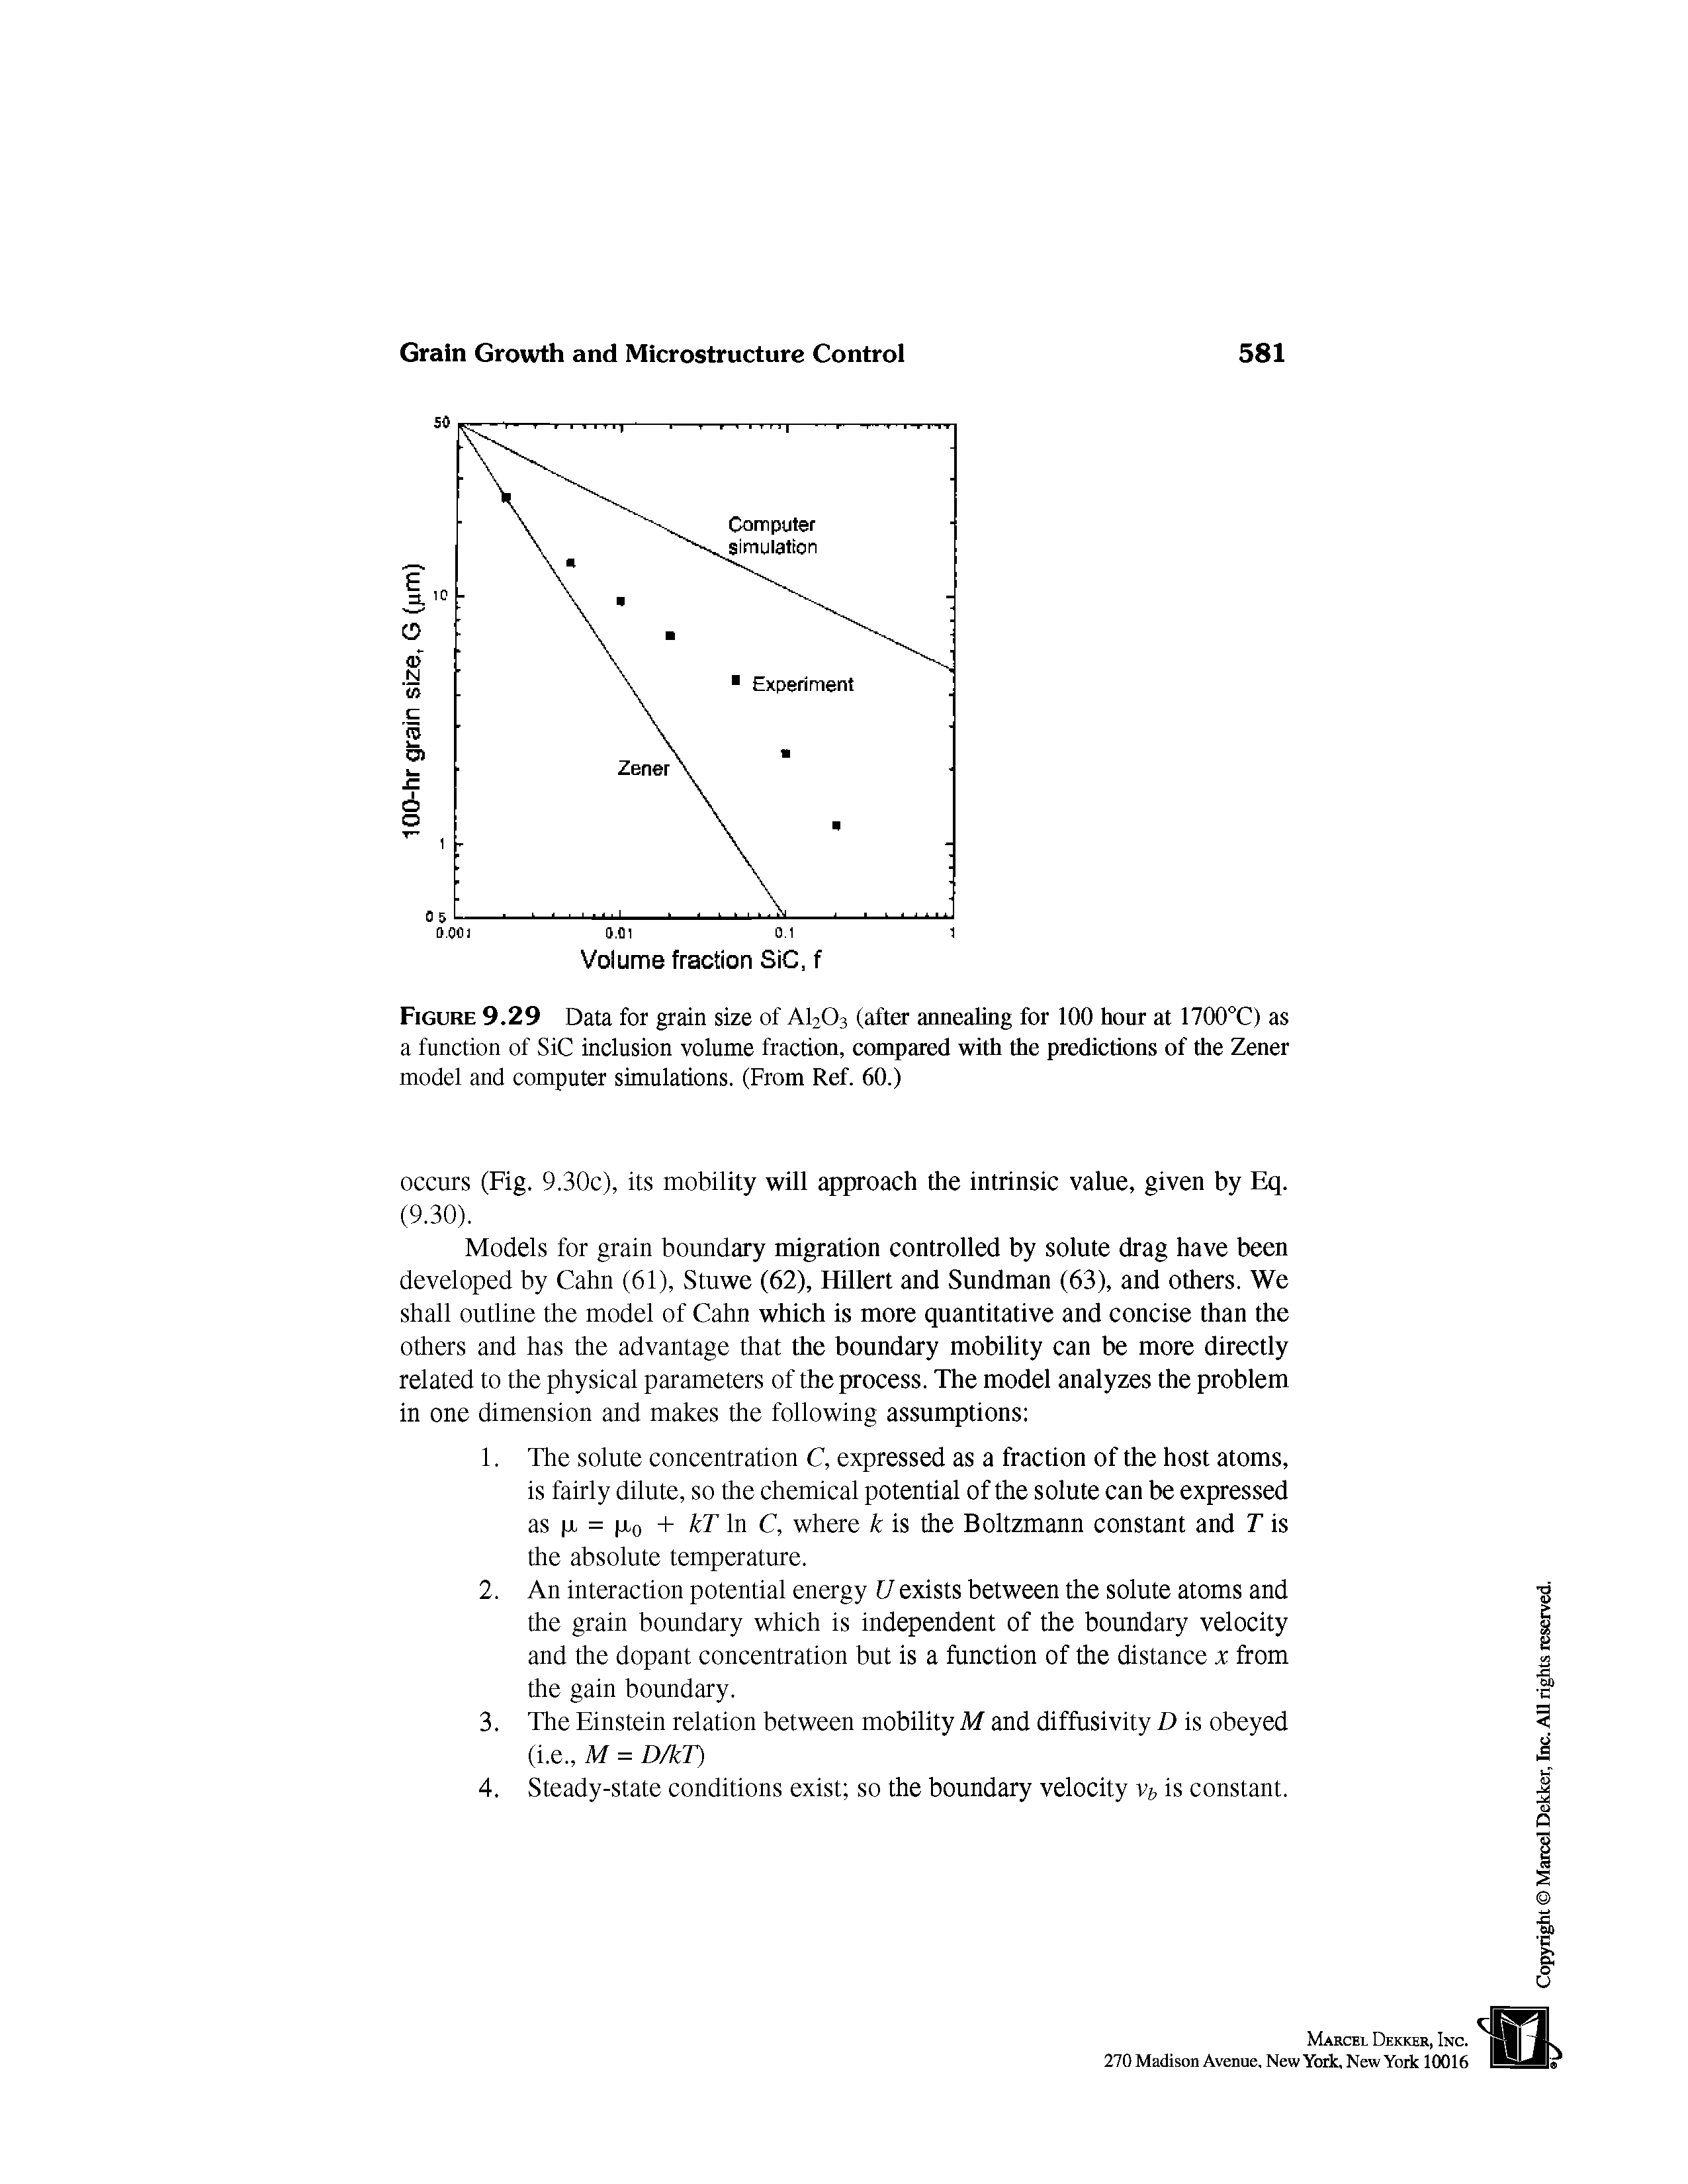 Figure 9.29 Data for grain size of AI2O3 (after annealing for 100 hour at 1700 C) as a function of SiC inclusion volume fraction, compared with the predictions of the Zener model and computer simulations. (From Ref. 60.)...